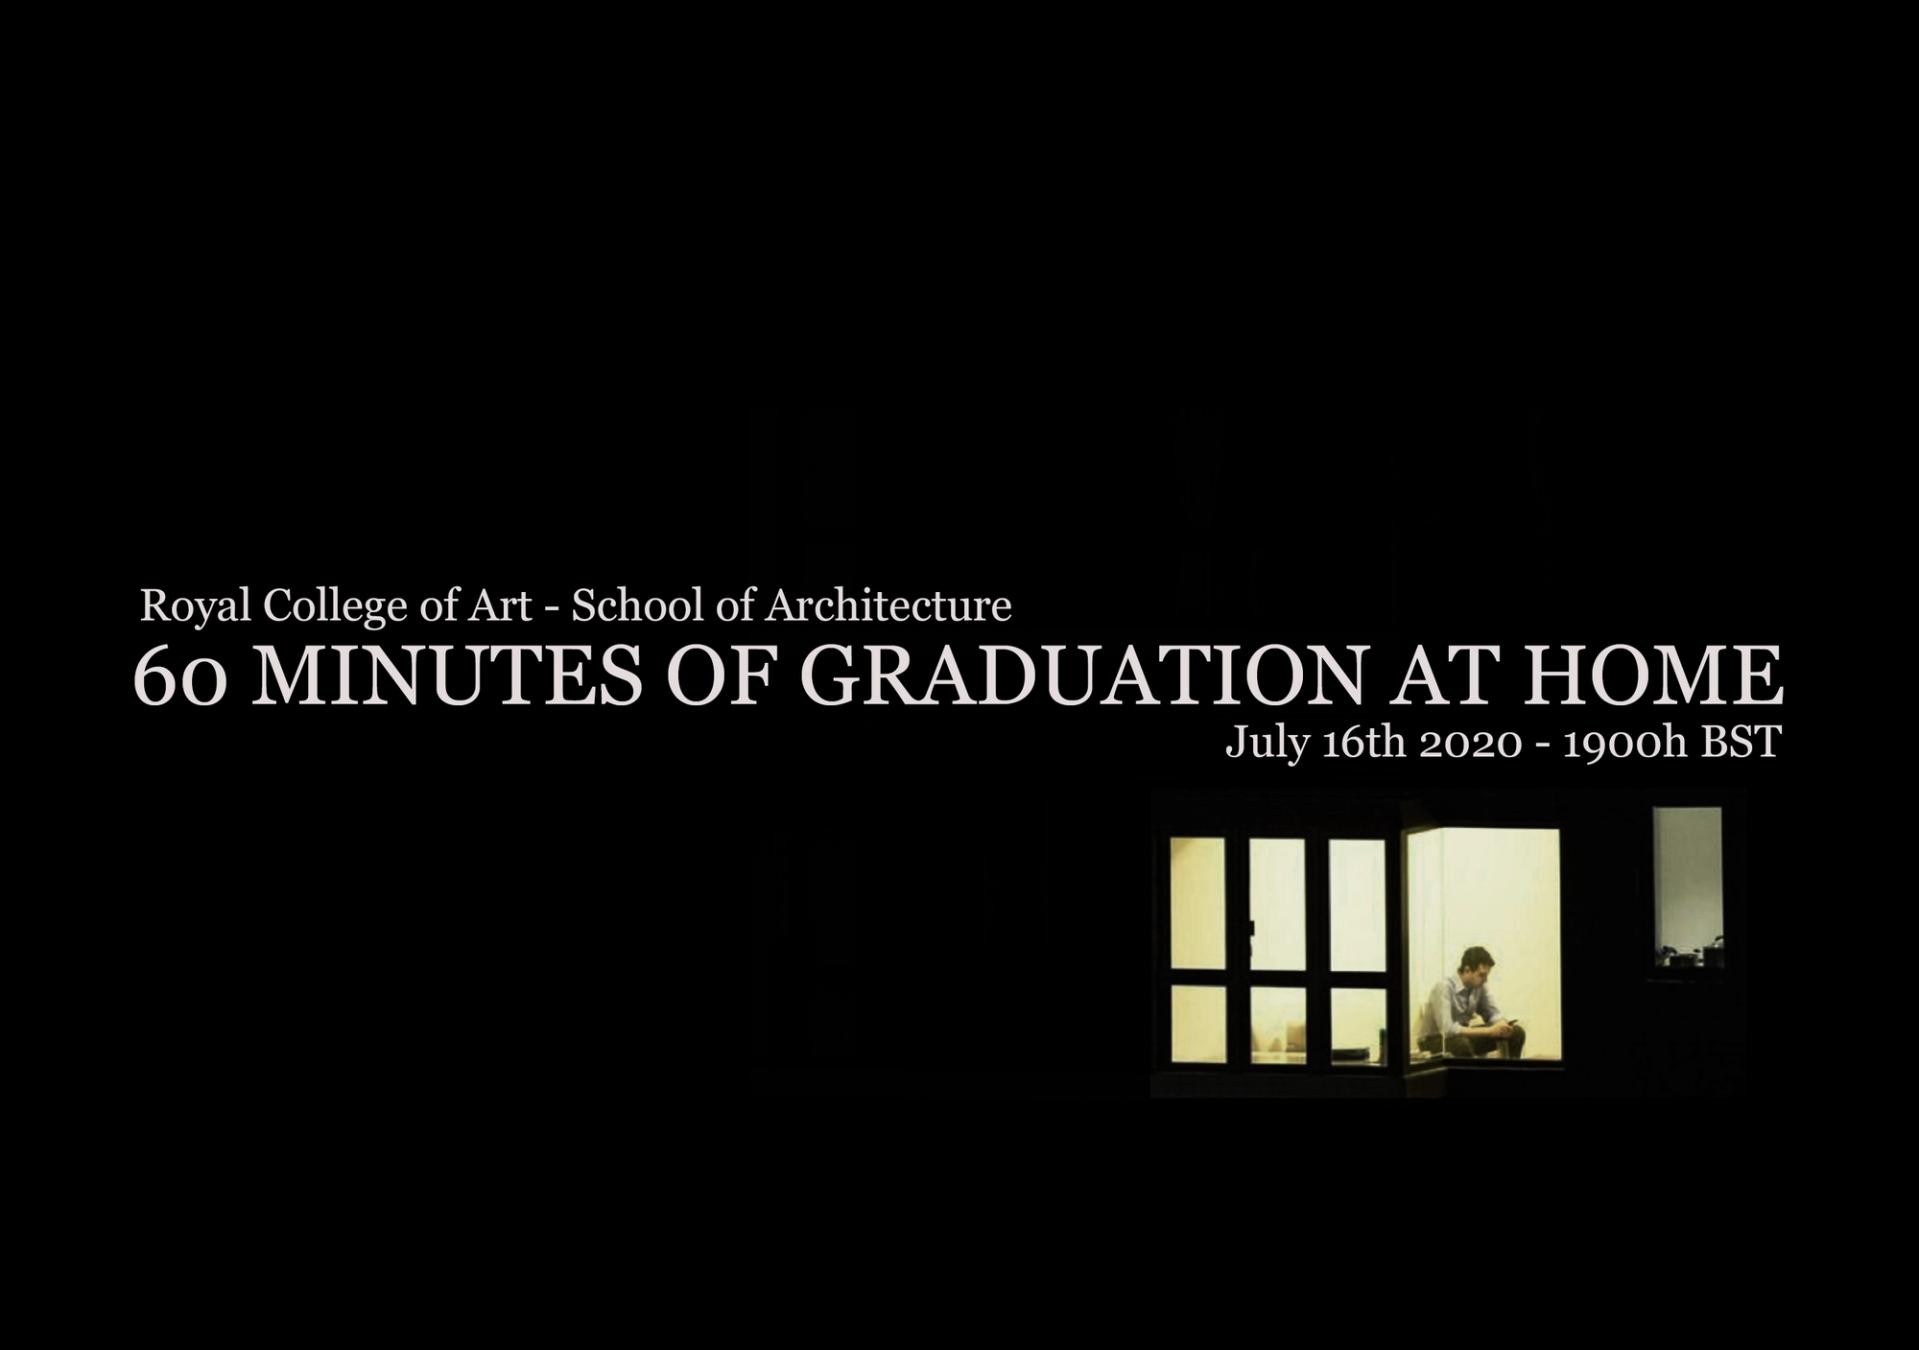 60 Minutes of Graduation at Home from the School of Architecture